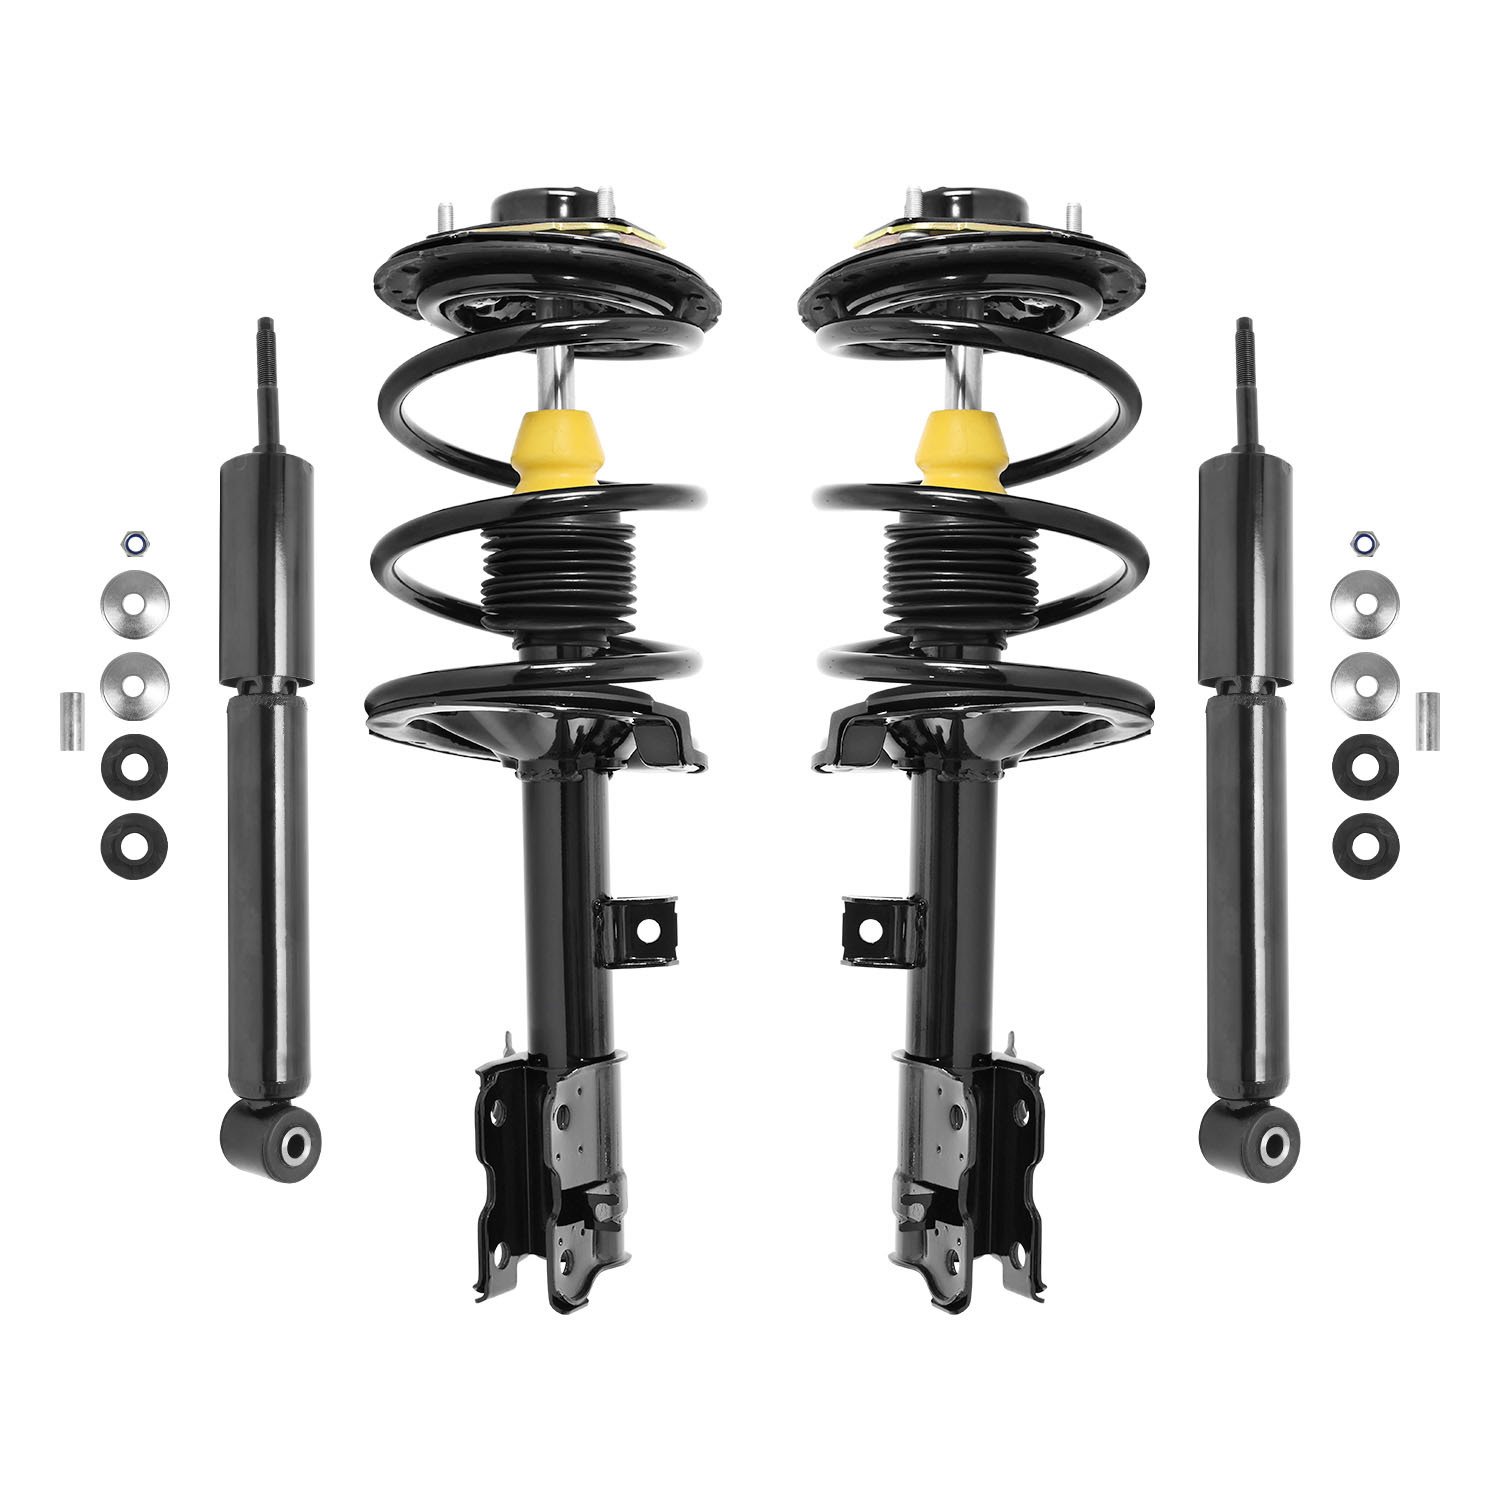 4-11761-255600-001 Front & Rear Suspension Strut & Coil Spring Assembly Fits Select Nissan Murano